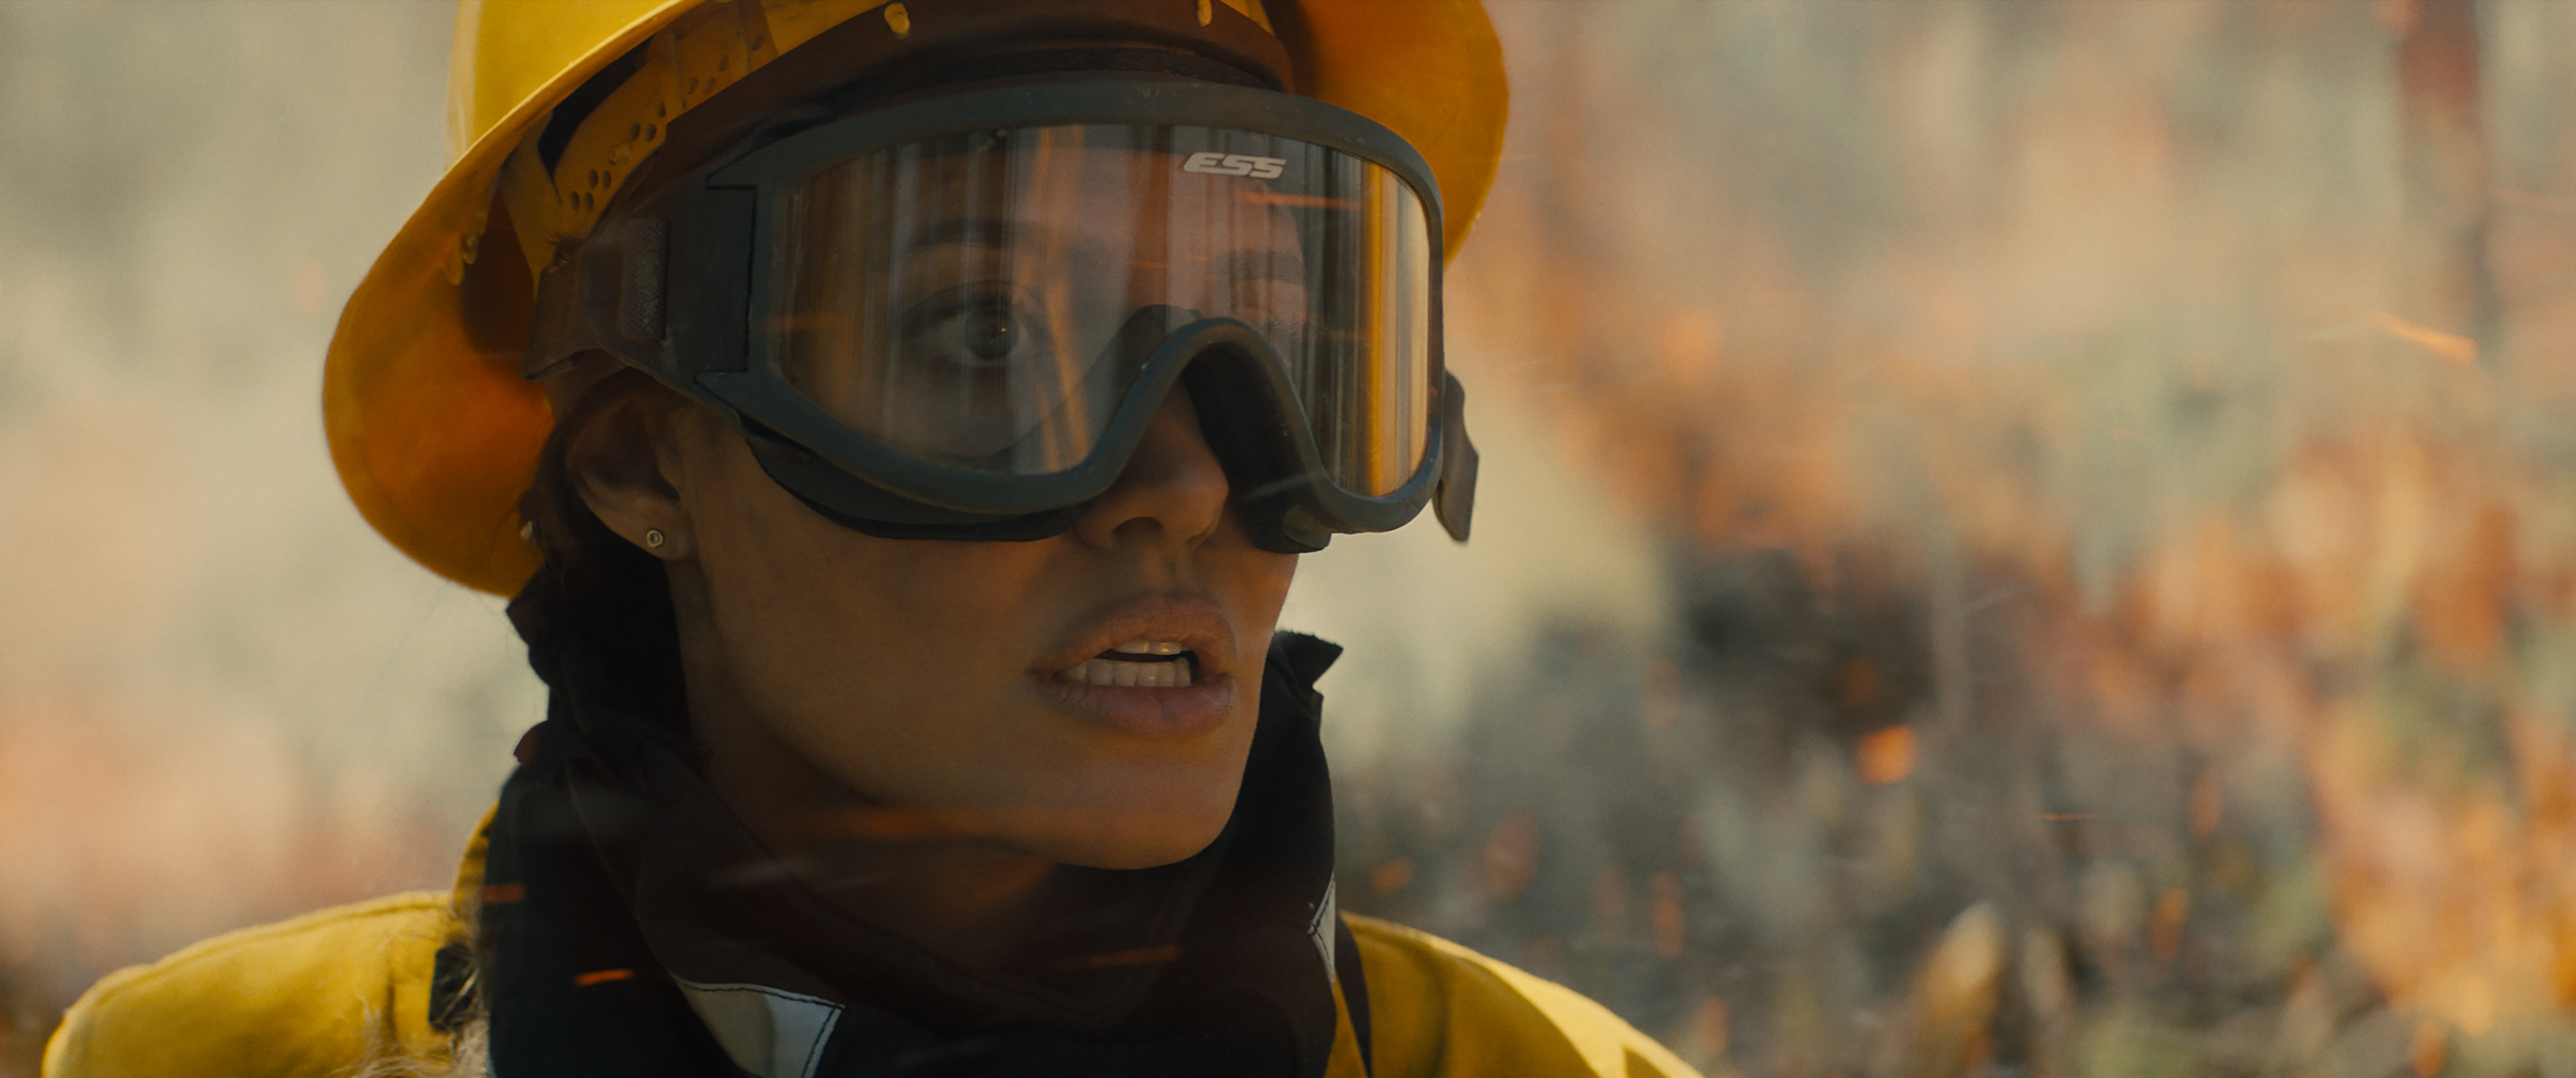 Angelina Jolie in close-up in firefighter gear in Those Who Wish Me Dead